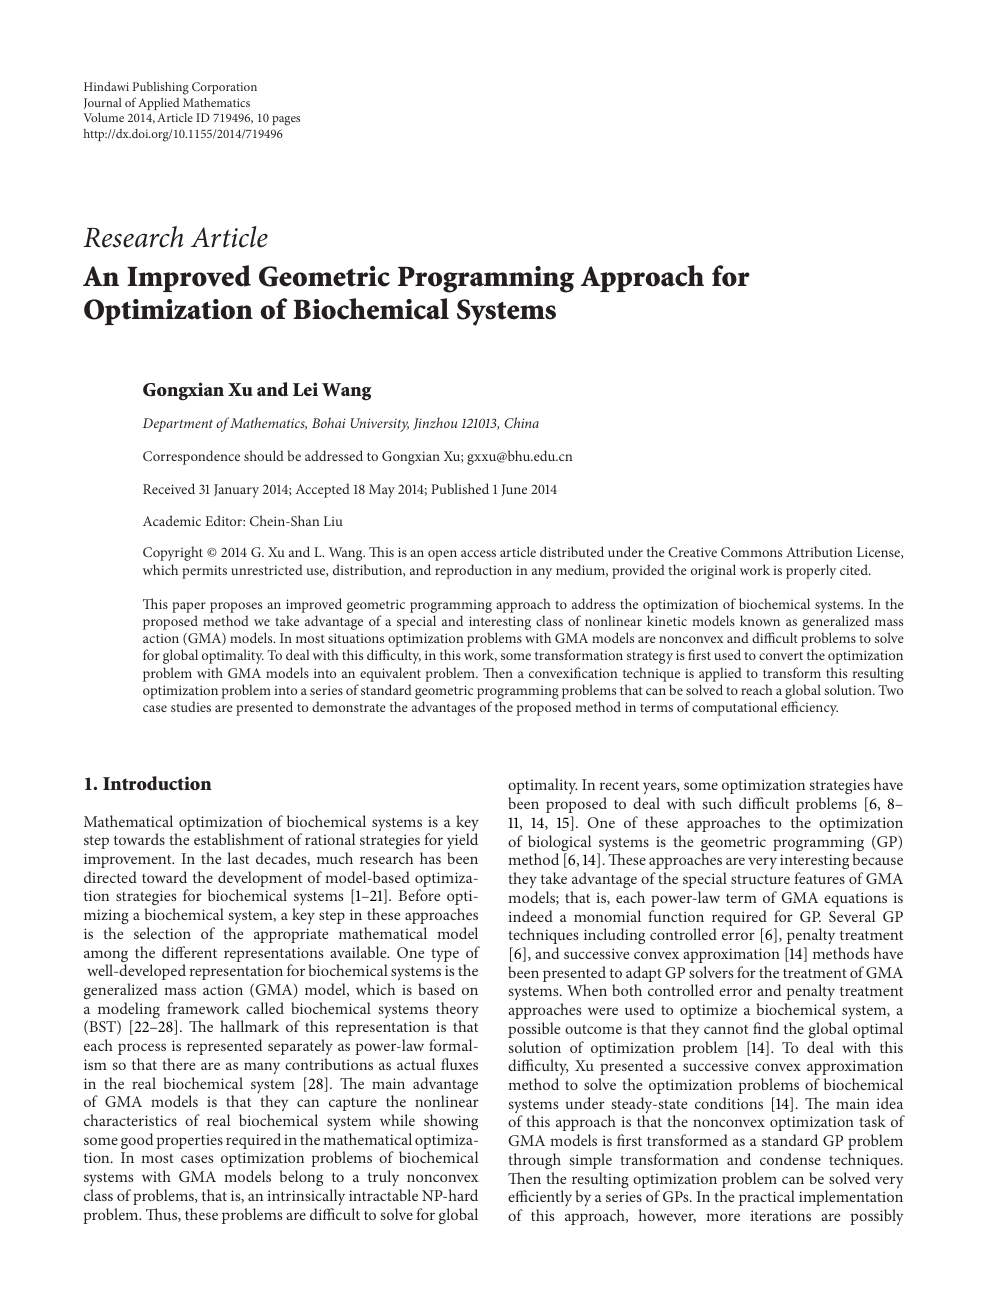 An Improved Geometric Programming Approach For Optimization Of Biochemical Systems Topic Of Research Paper In Mathematics Download Scholarly Article Pdf And Read For Free On Cyberleninka Open Science Hub